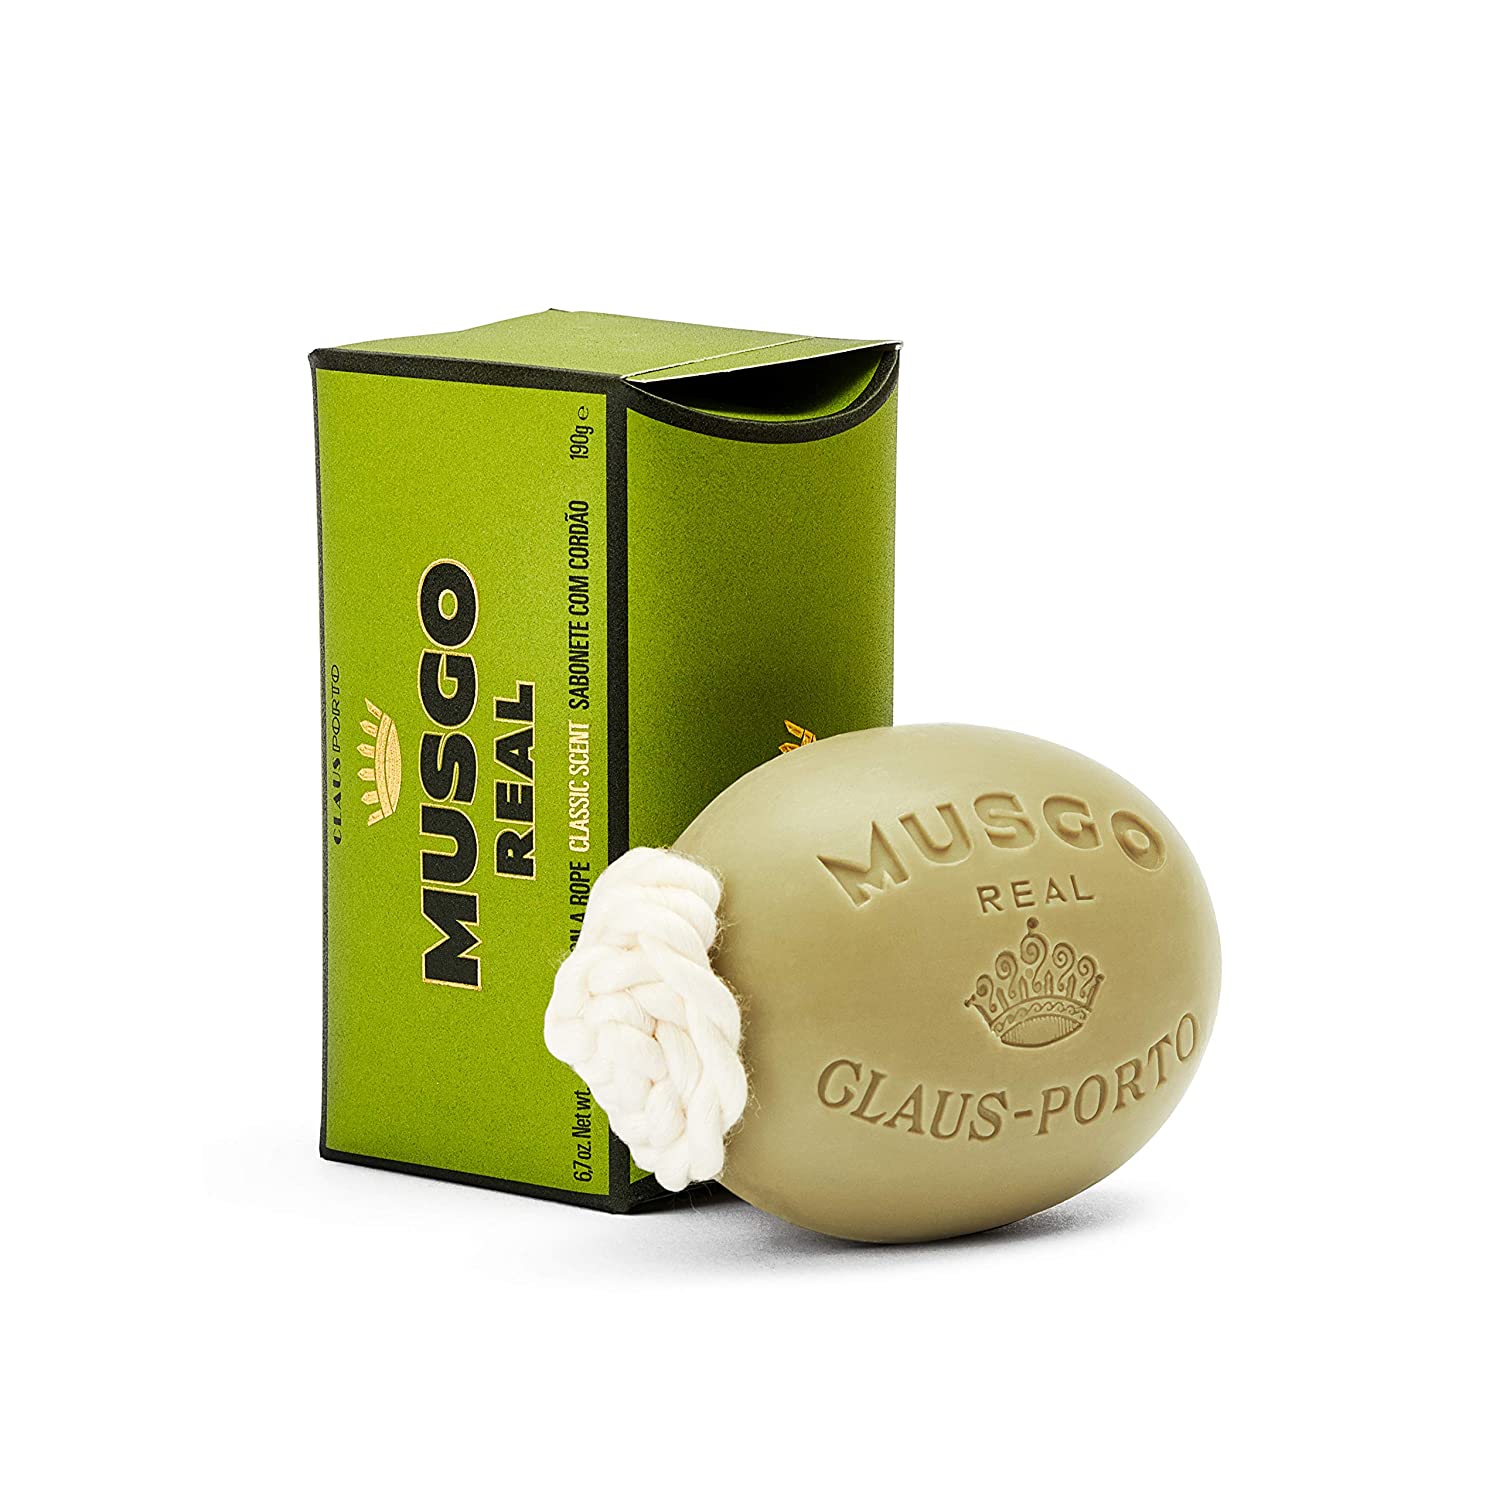 Mugso Real Classic Scent Soap on a Rope